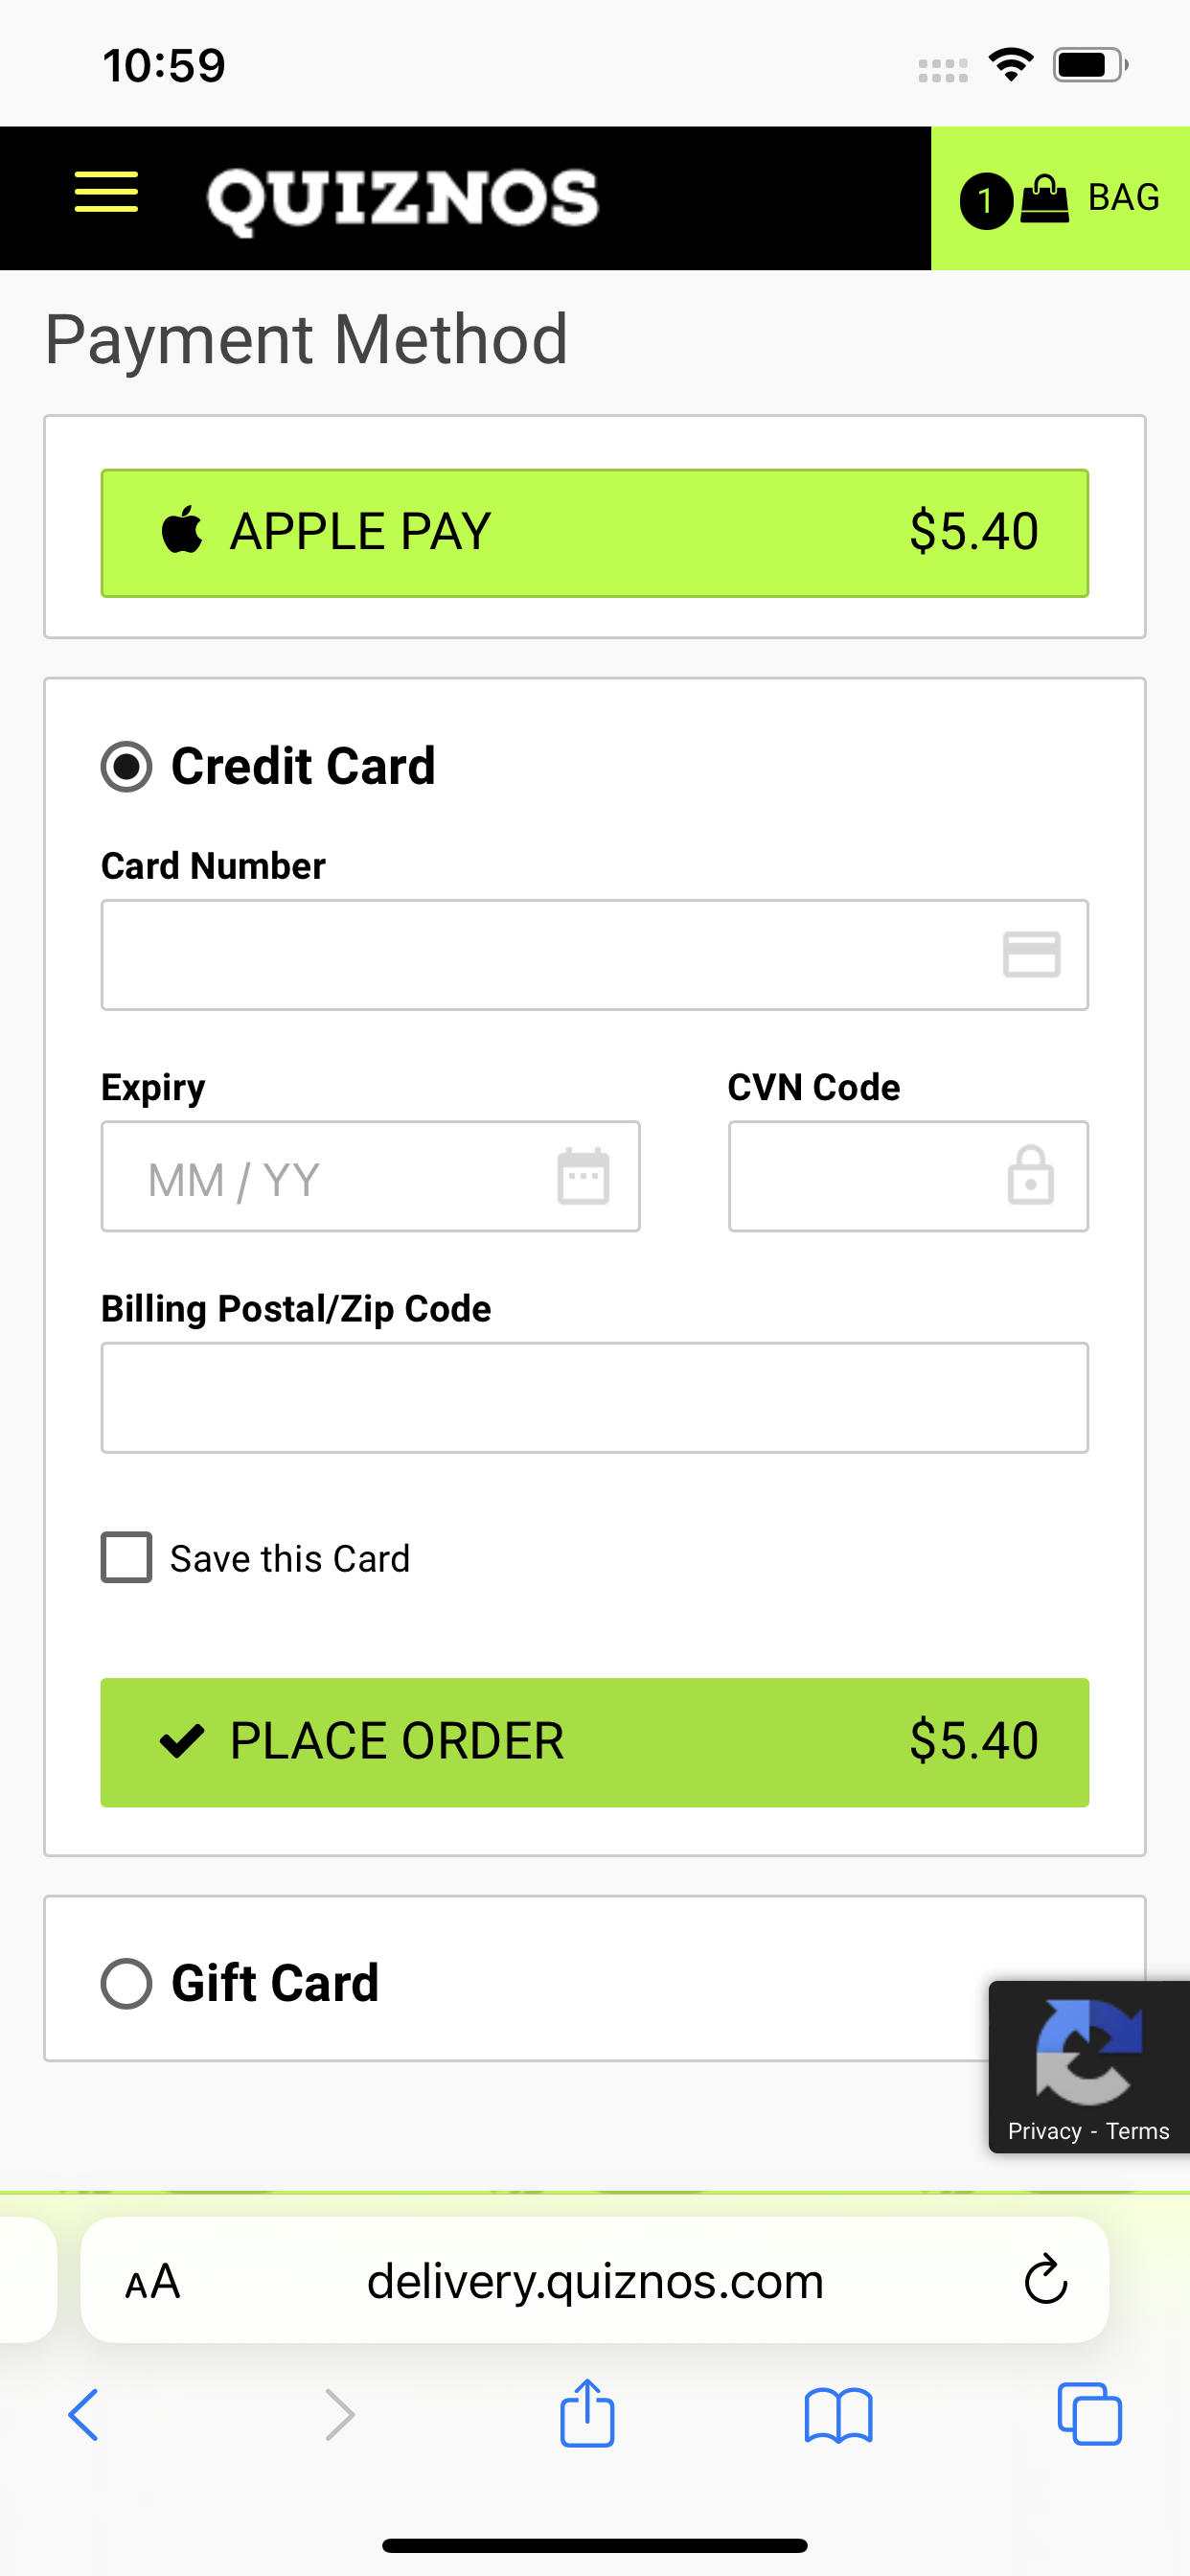 Quiznos accepts Apple Pay online.